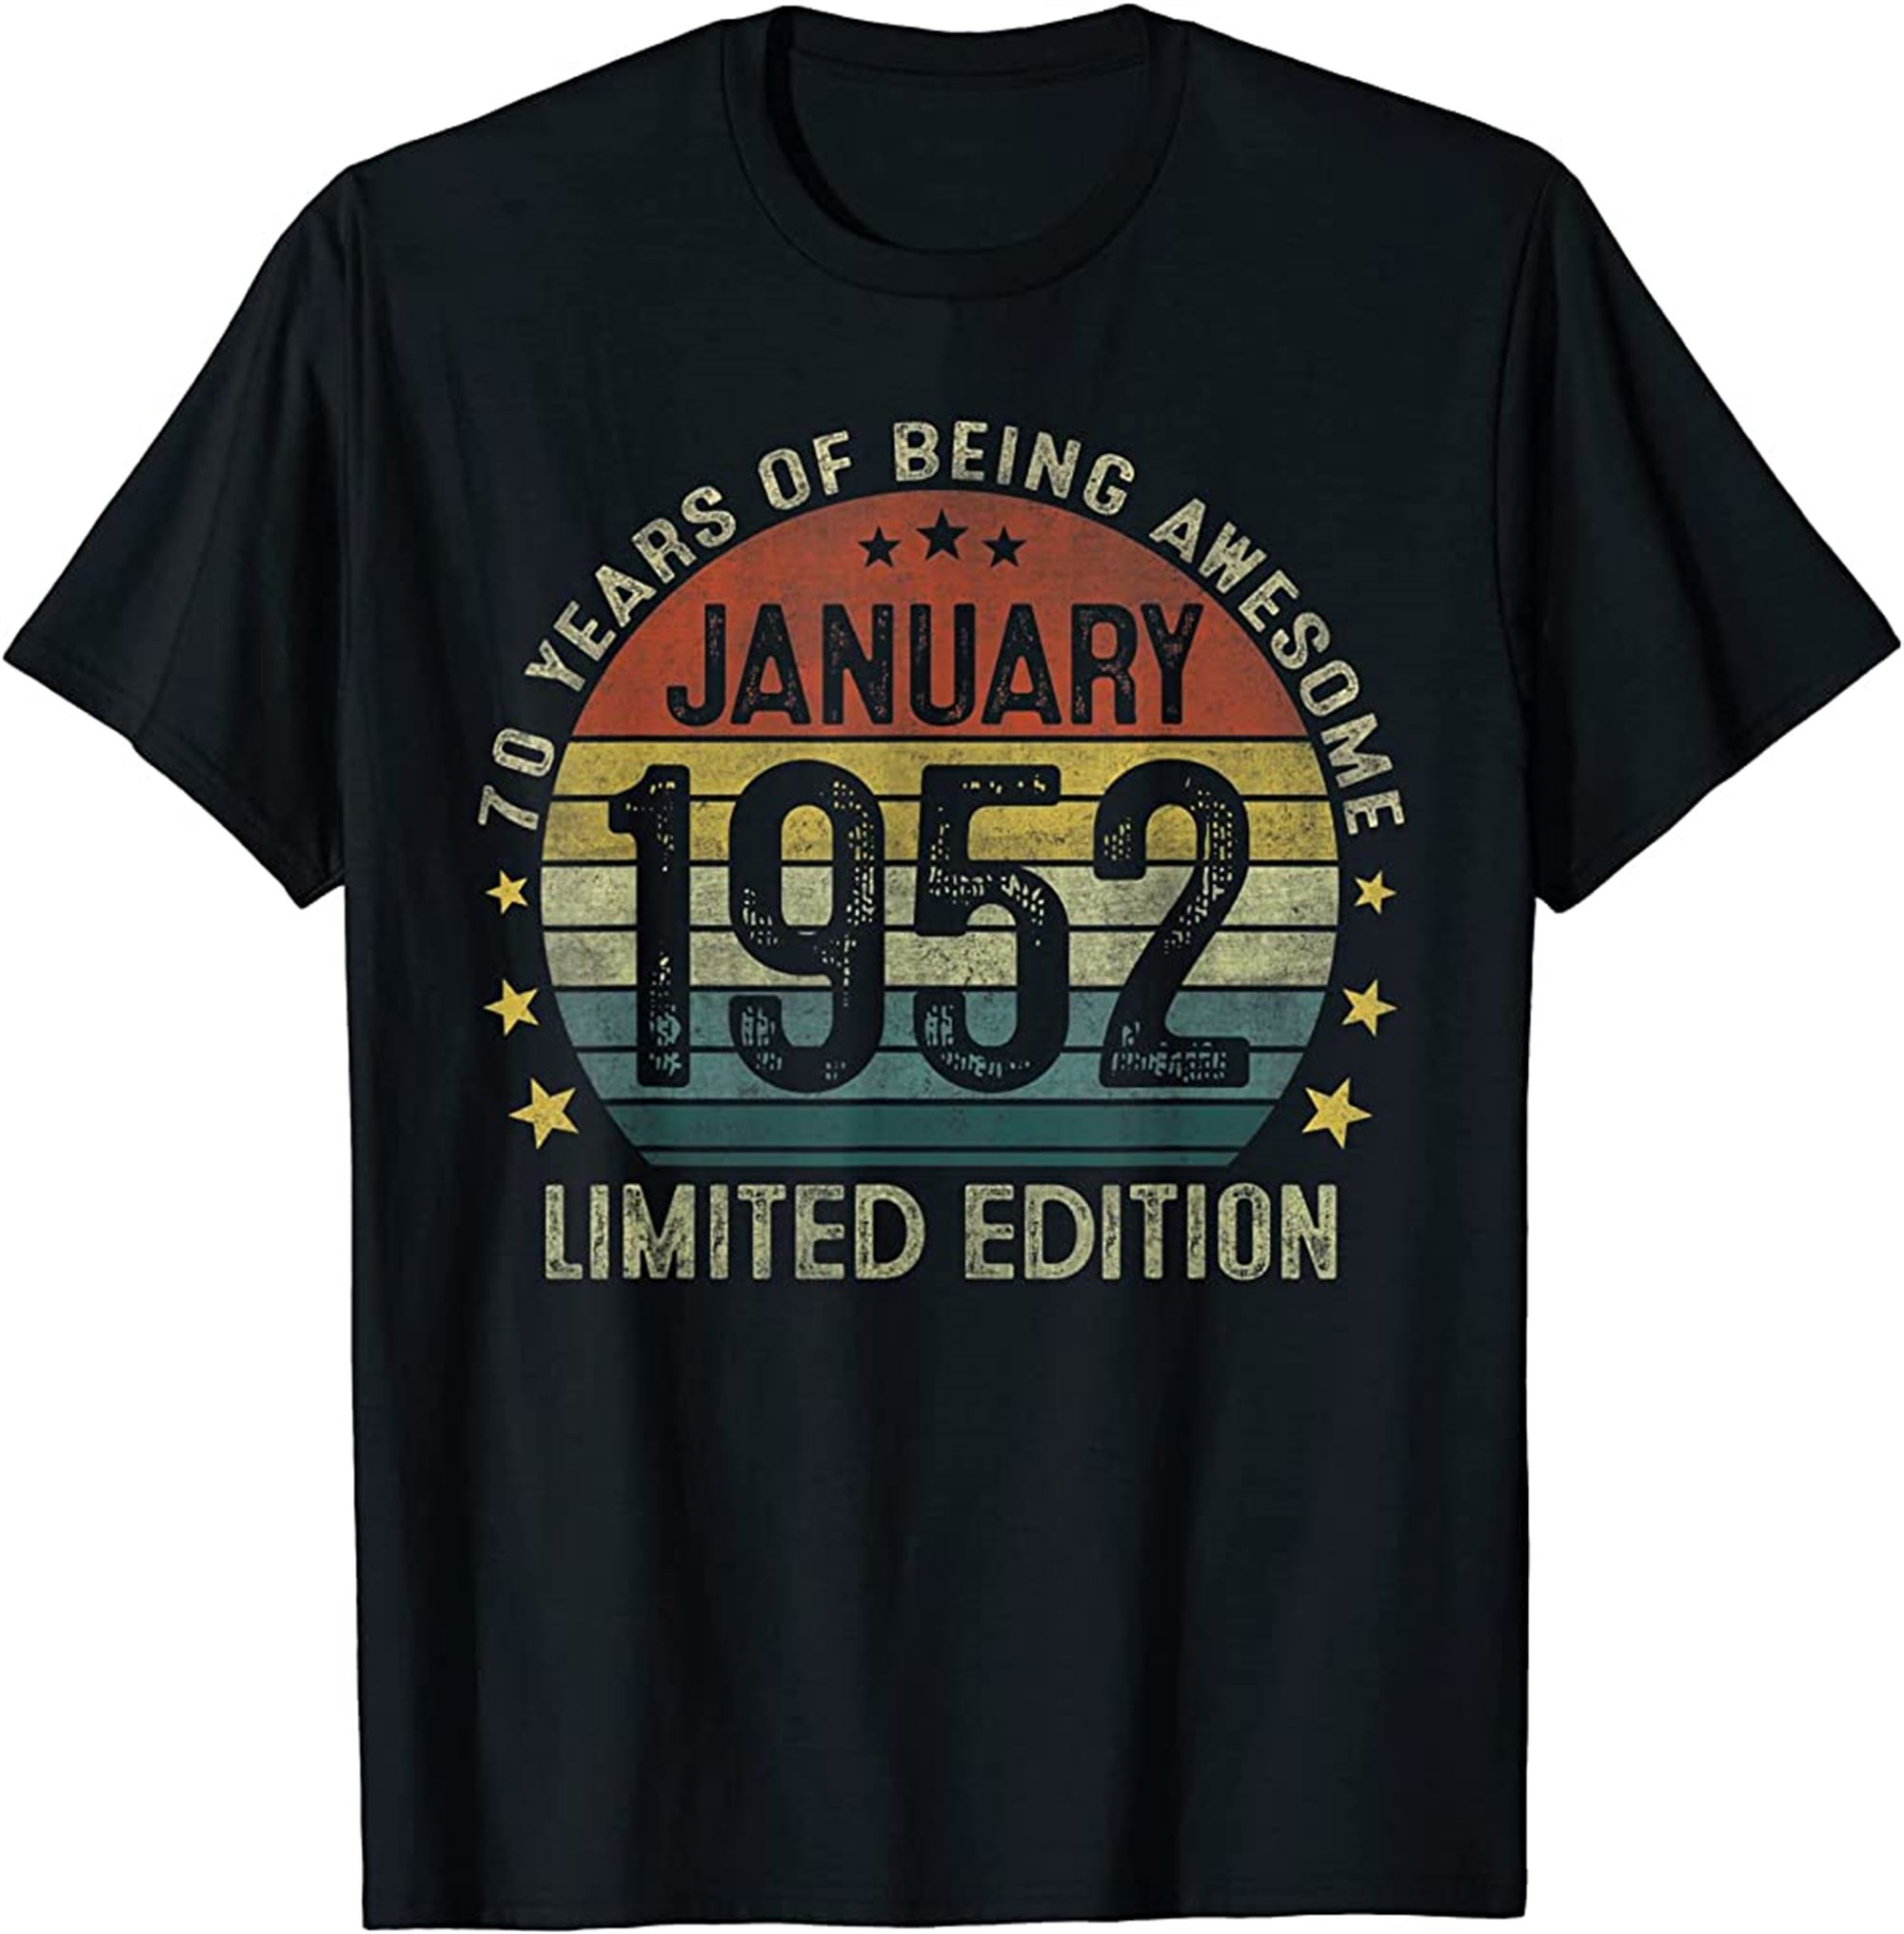 70 Year Old Gifts January 1952 Limited Edition 70th Birthday T-shirt Full Size Up To 5xl